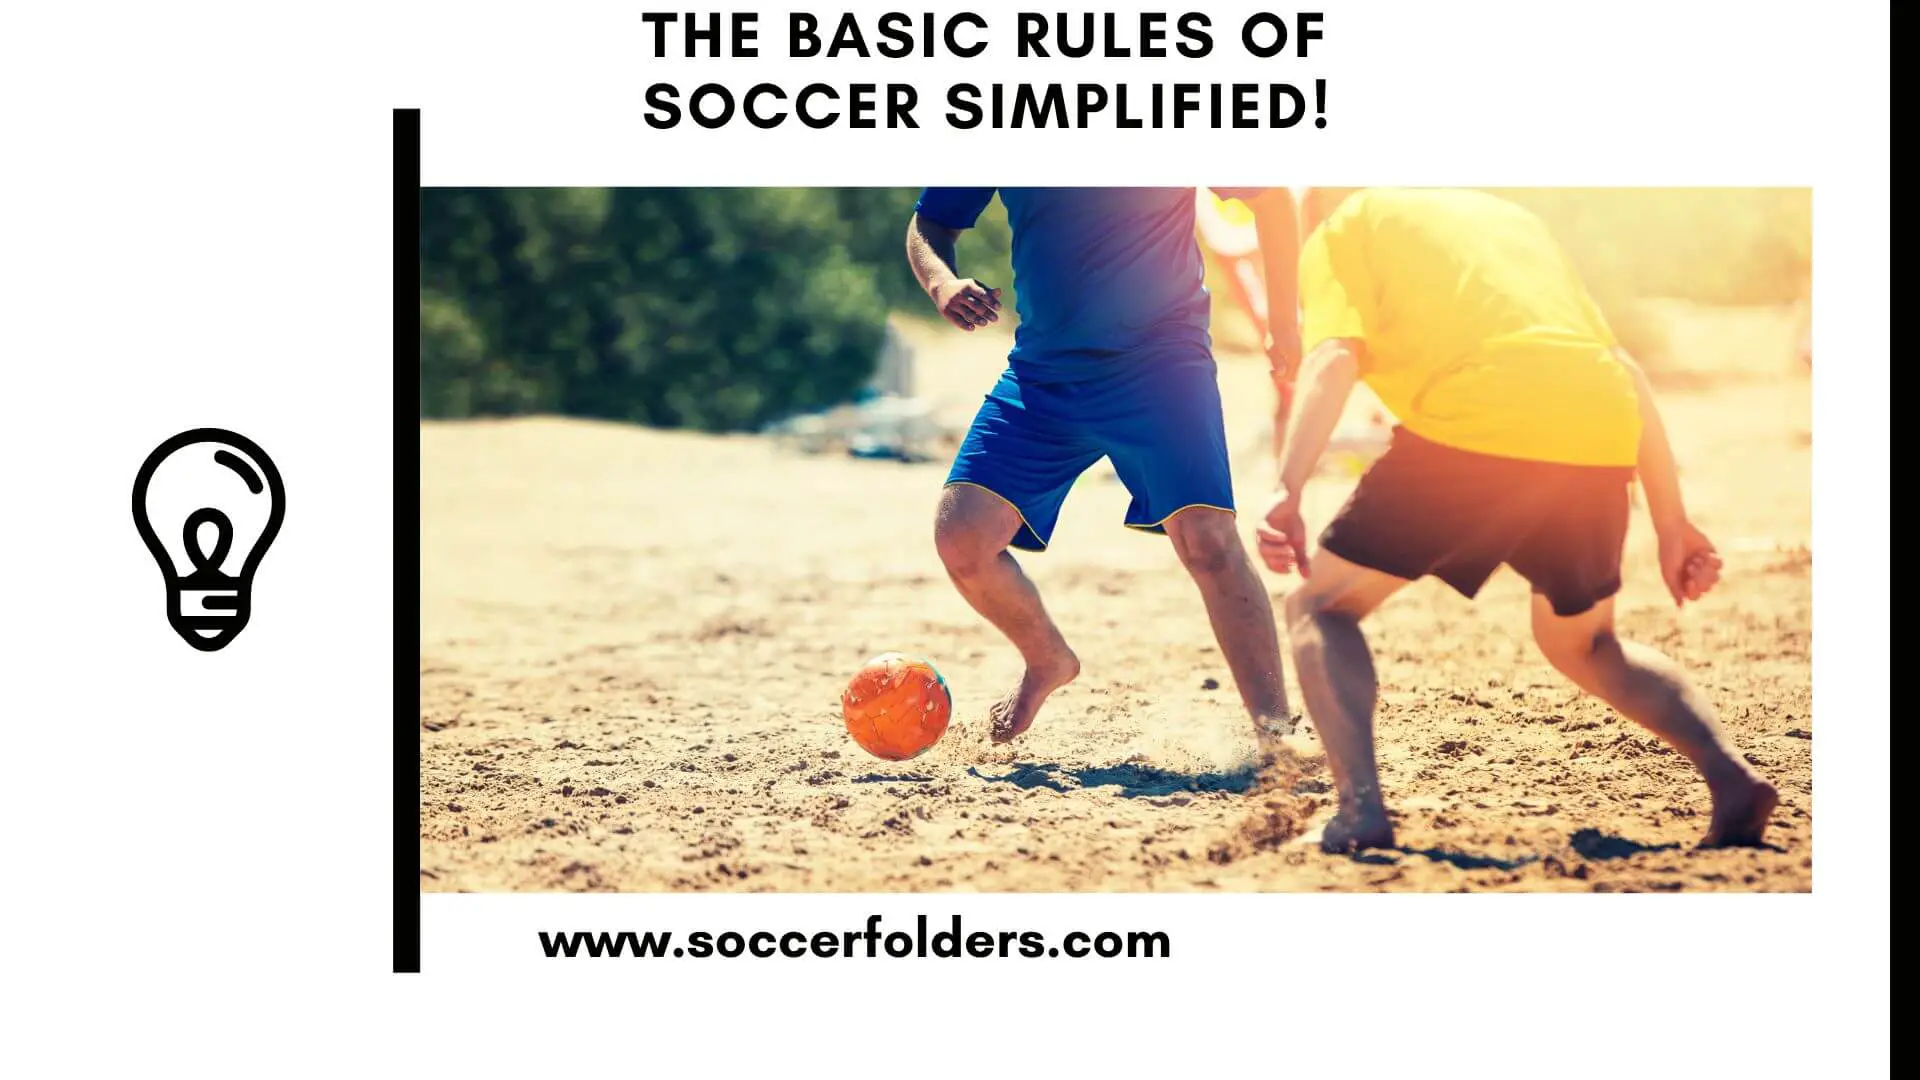 The rules of soccer simplified - Featured Image